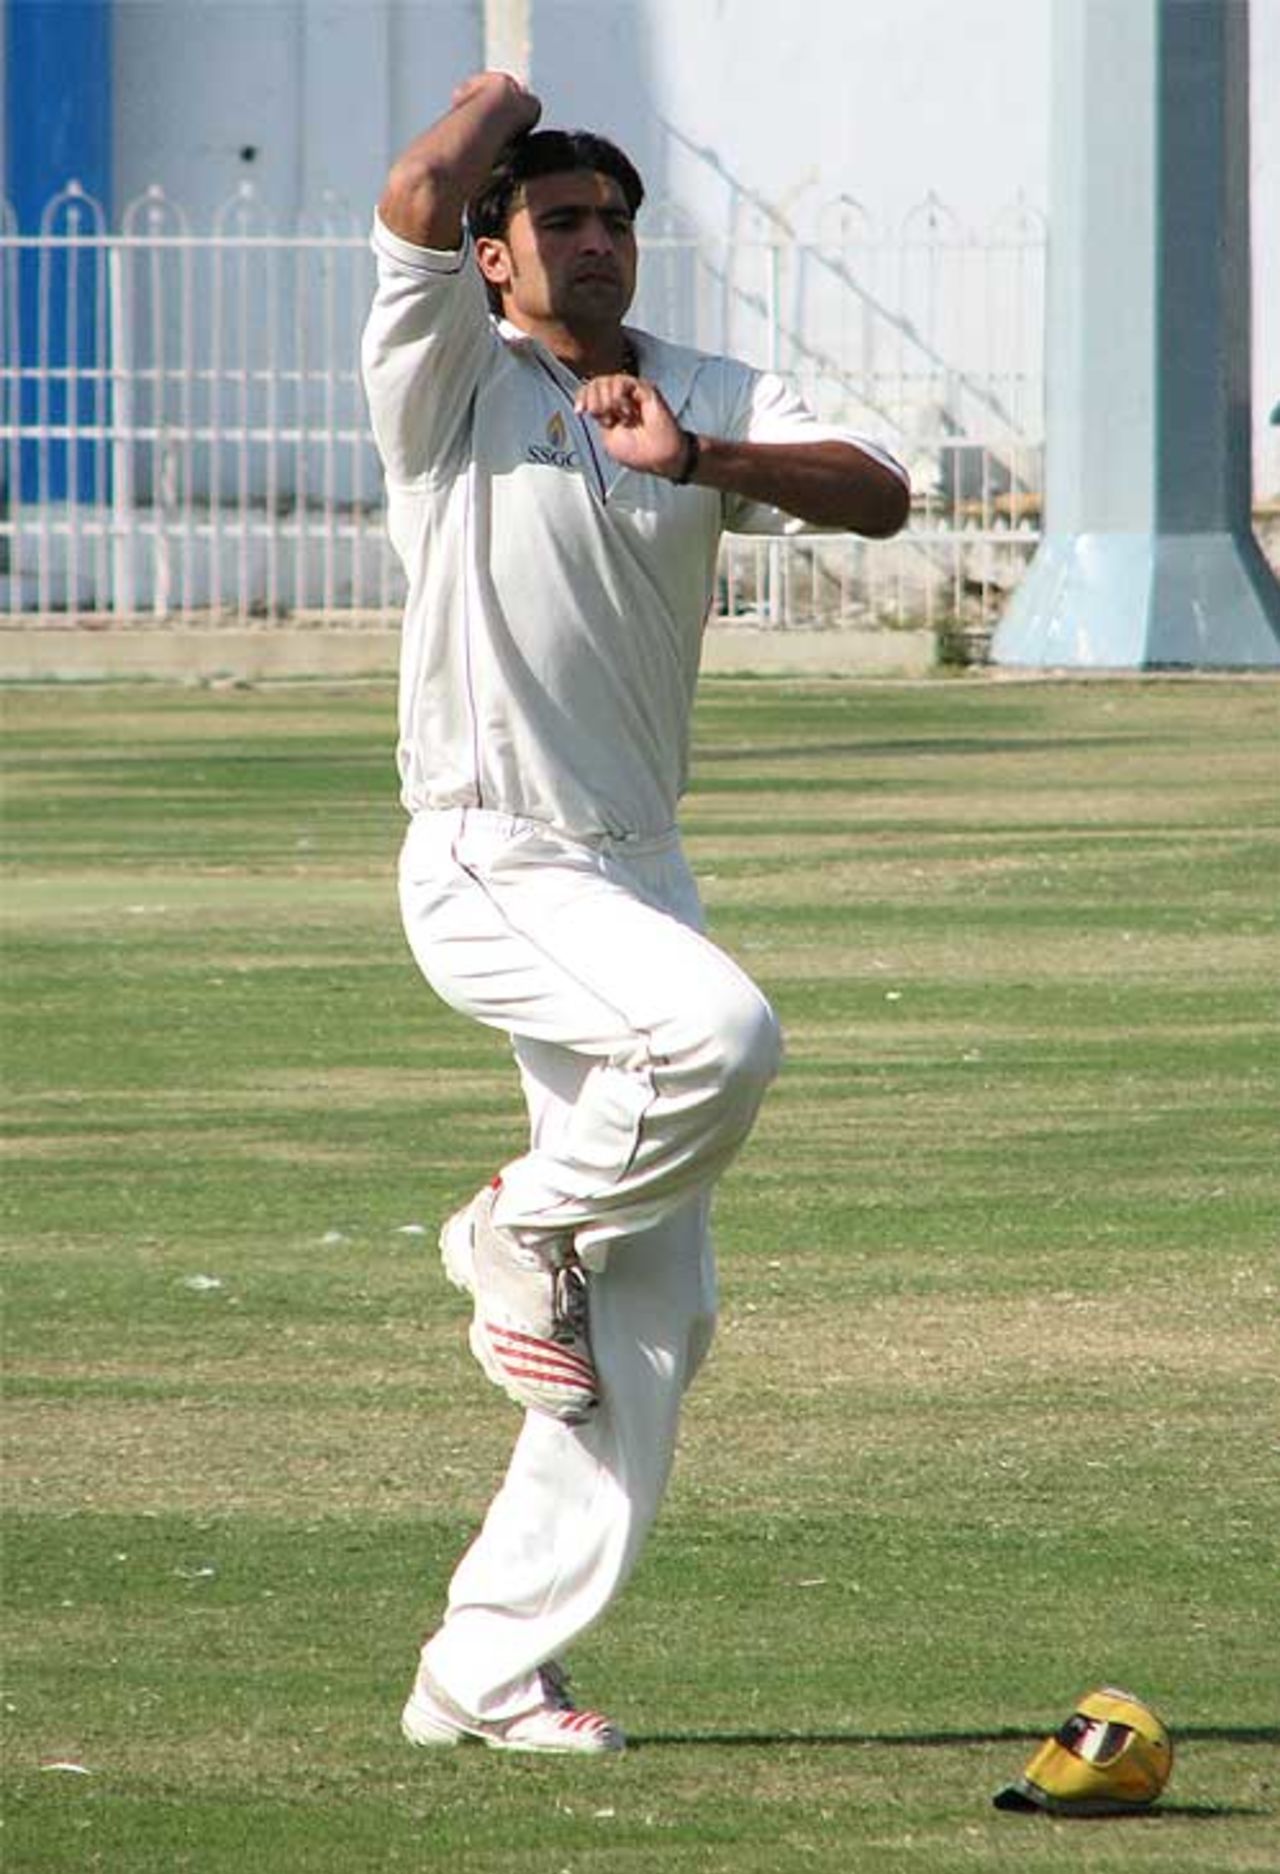 Sohail Khan in his delivery stride